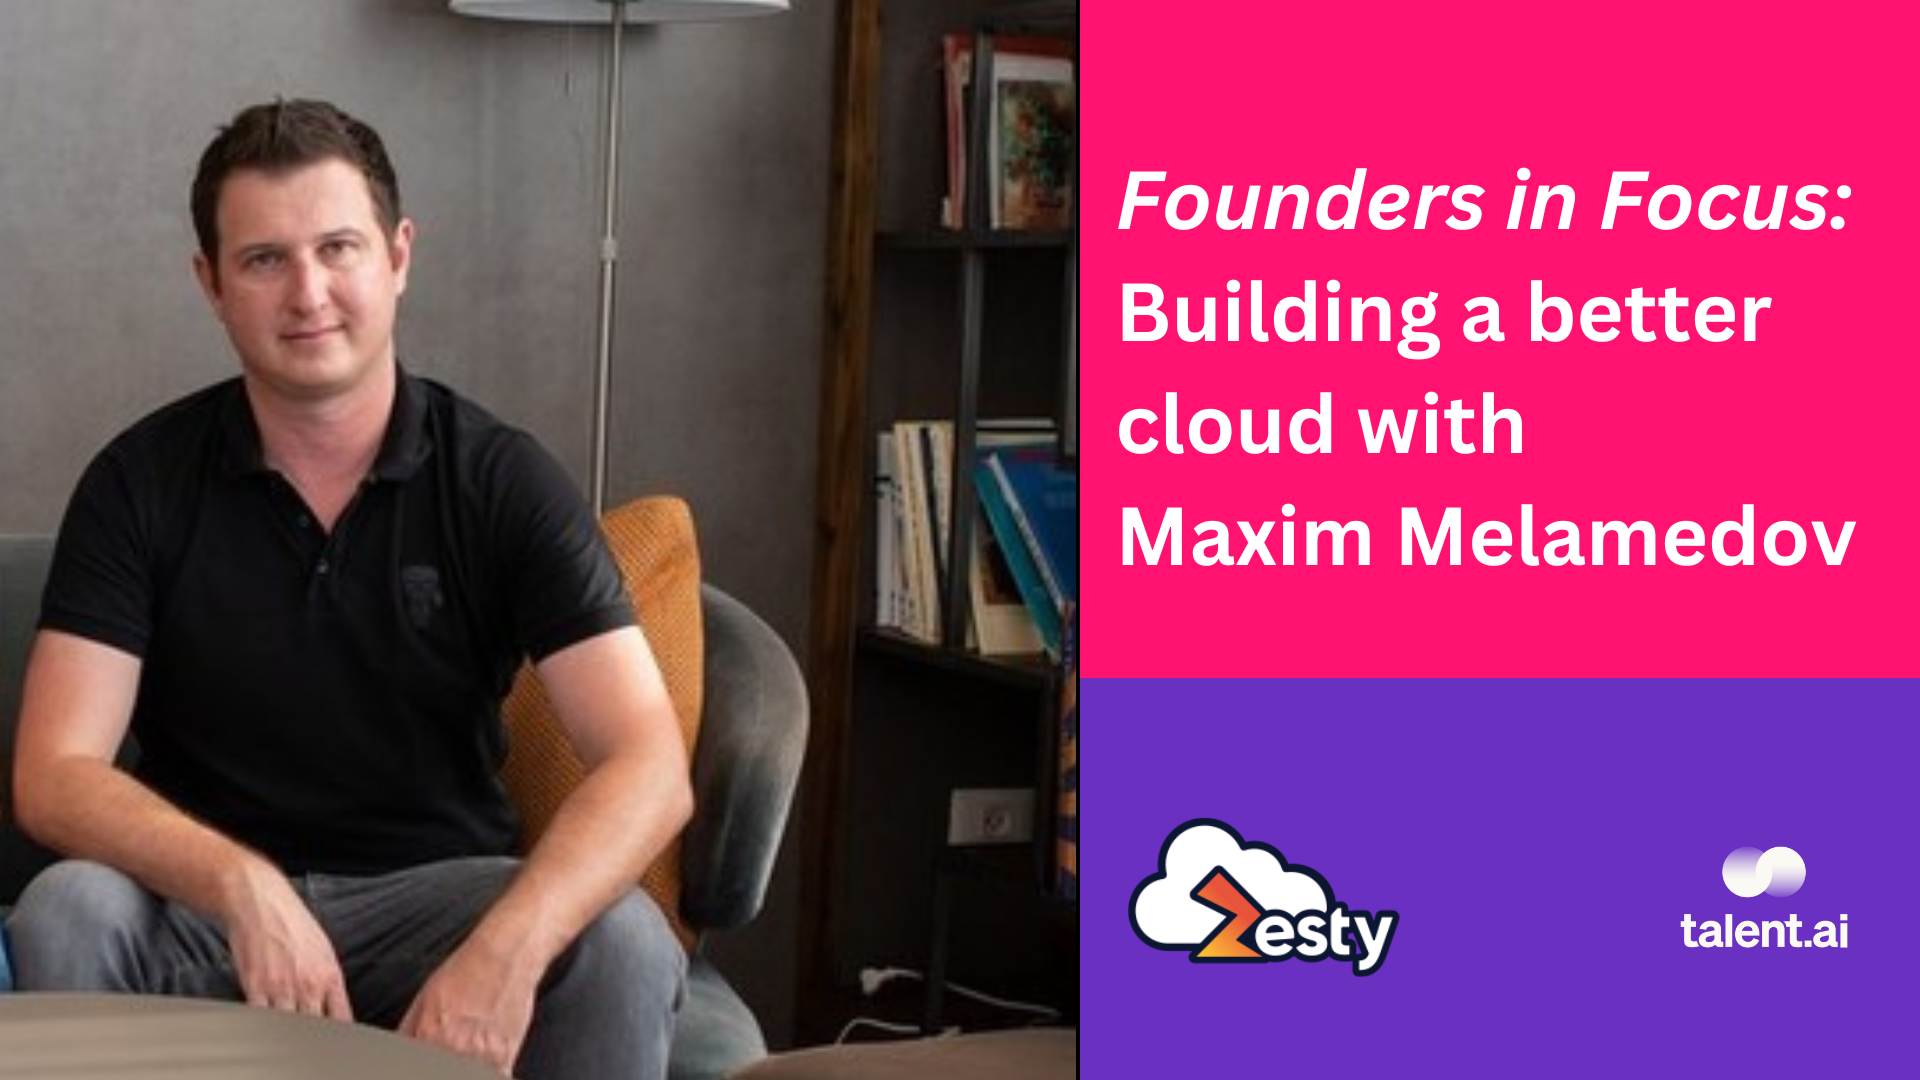 We spoke to Maxim Melamedov the CEO & Founder of Zesty, about what makes the company stand out in its industry, talent and growth.